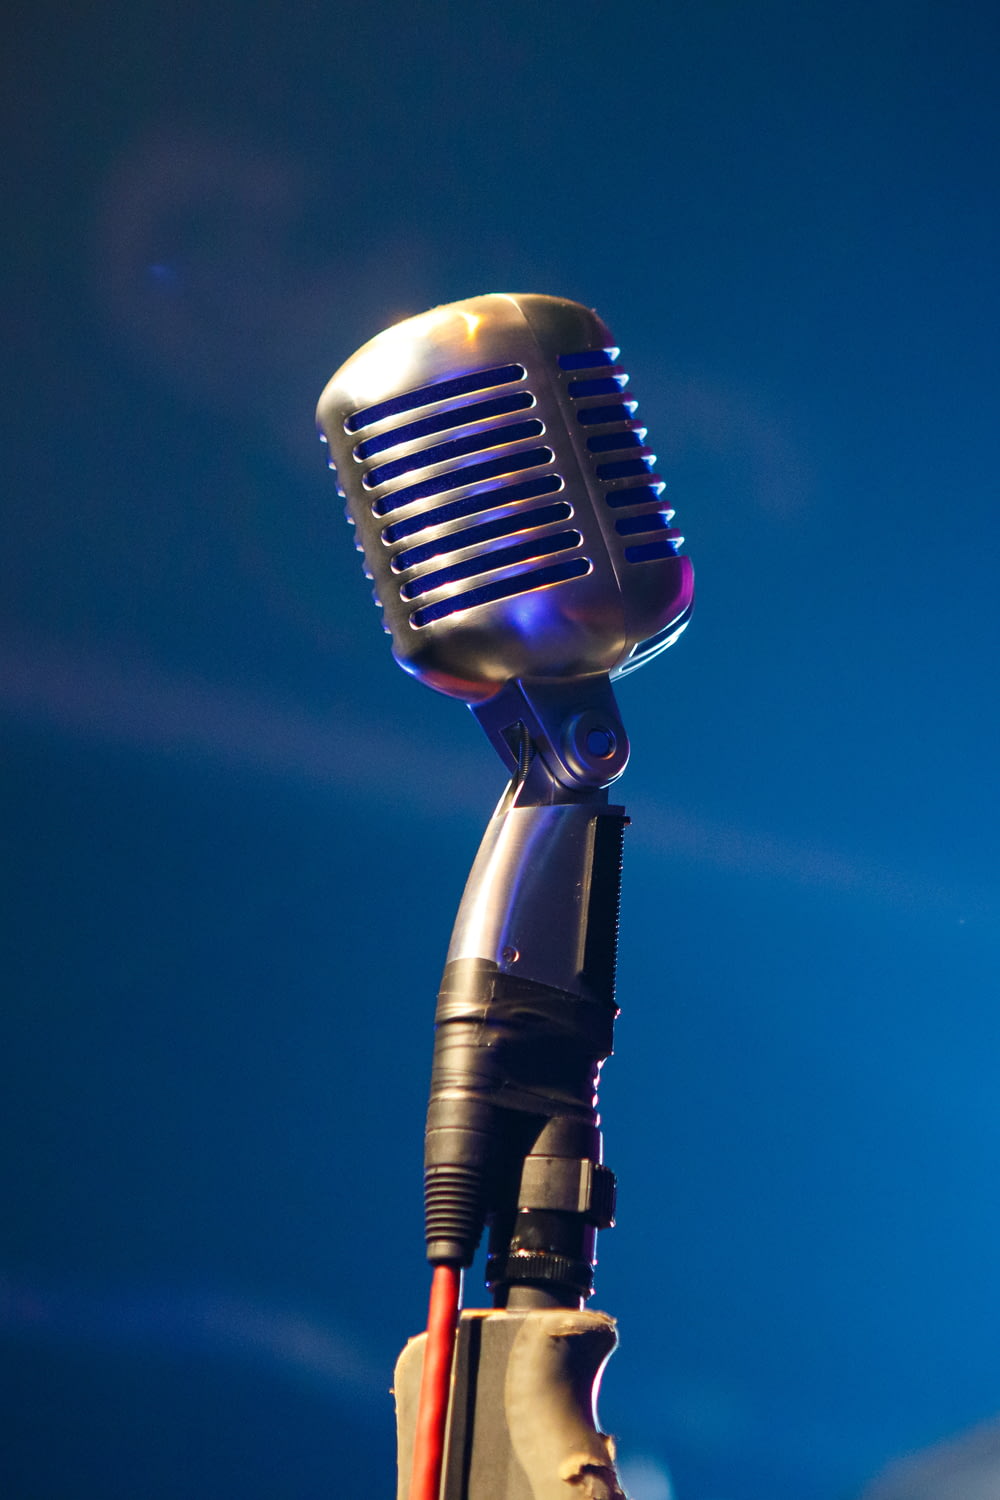 black microphone on blue background